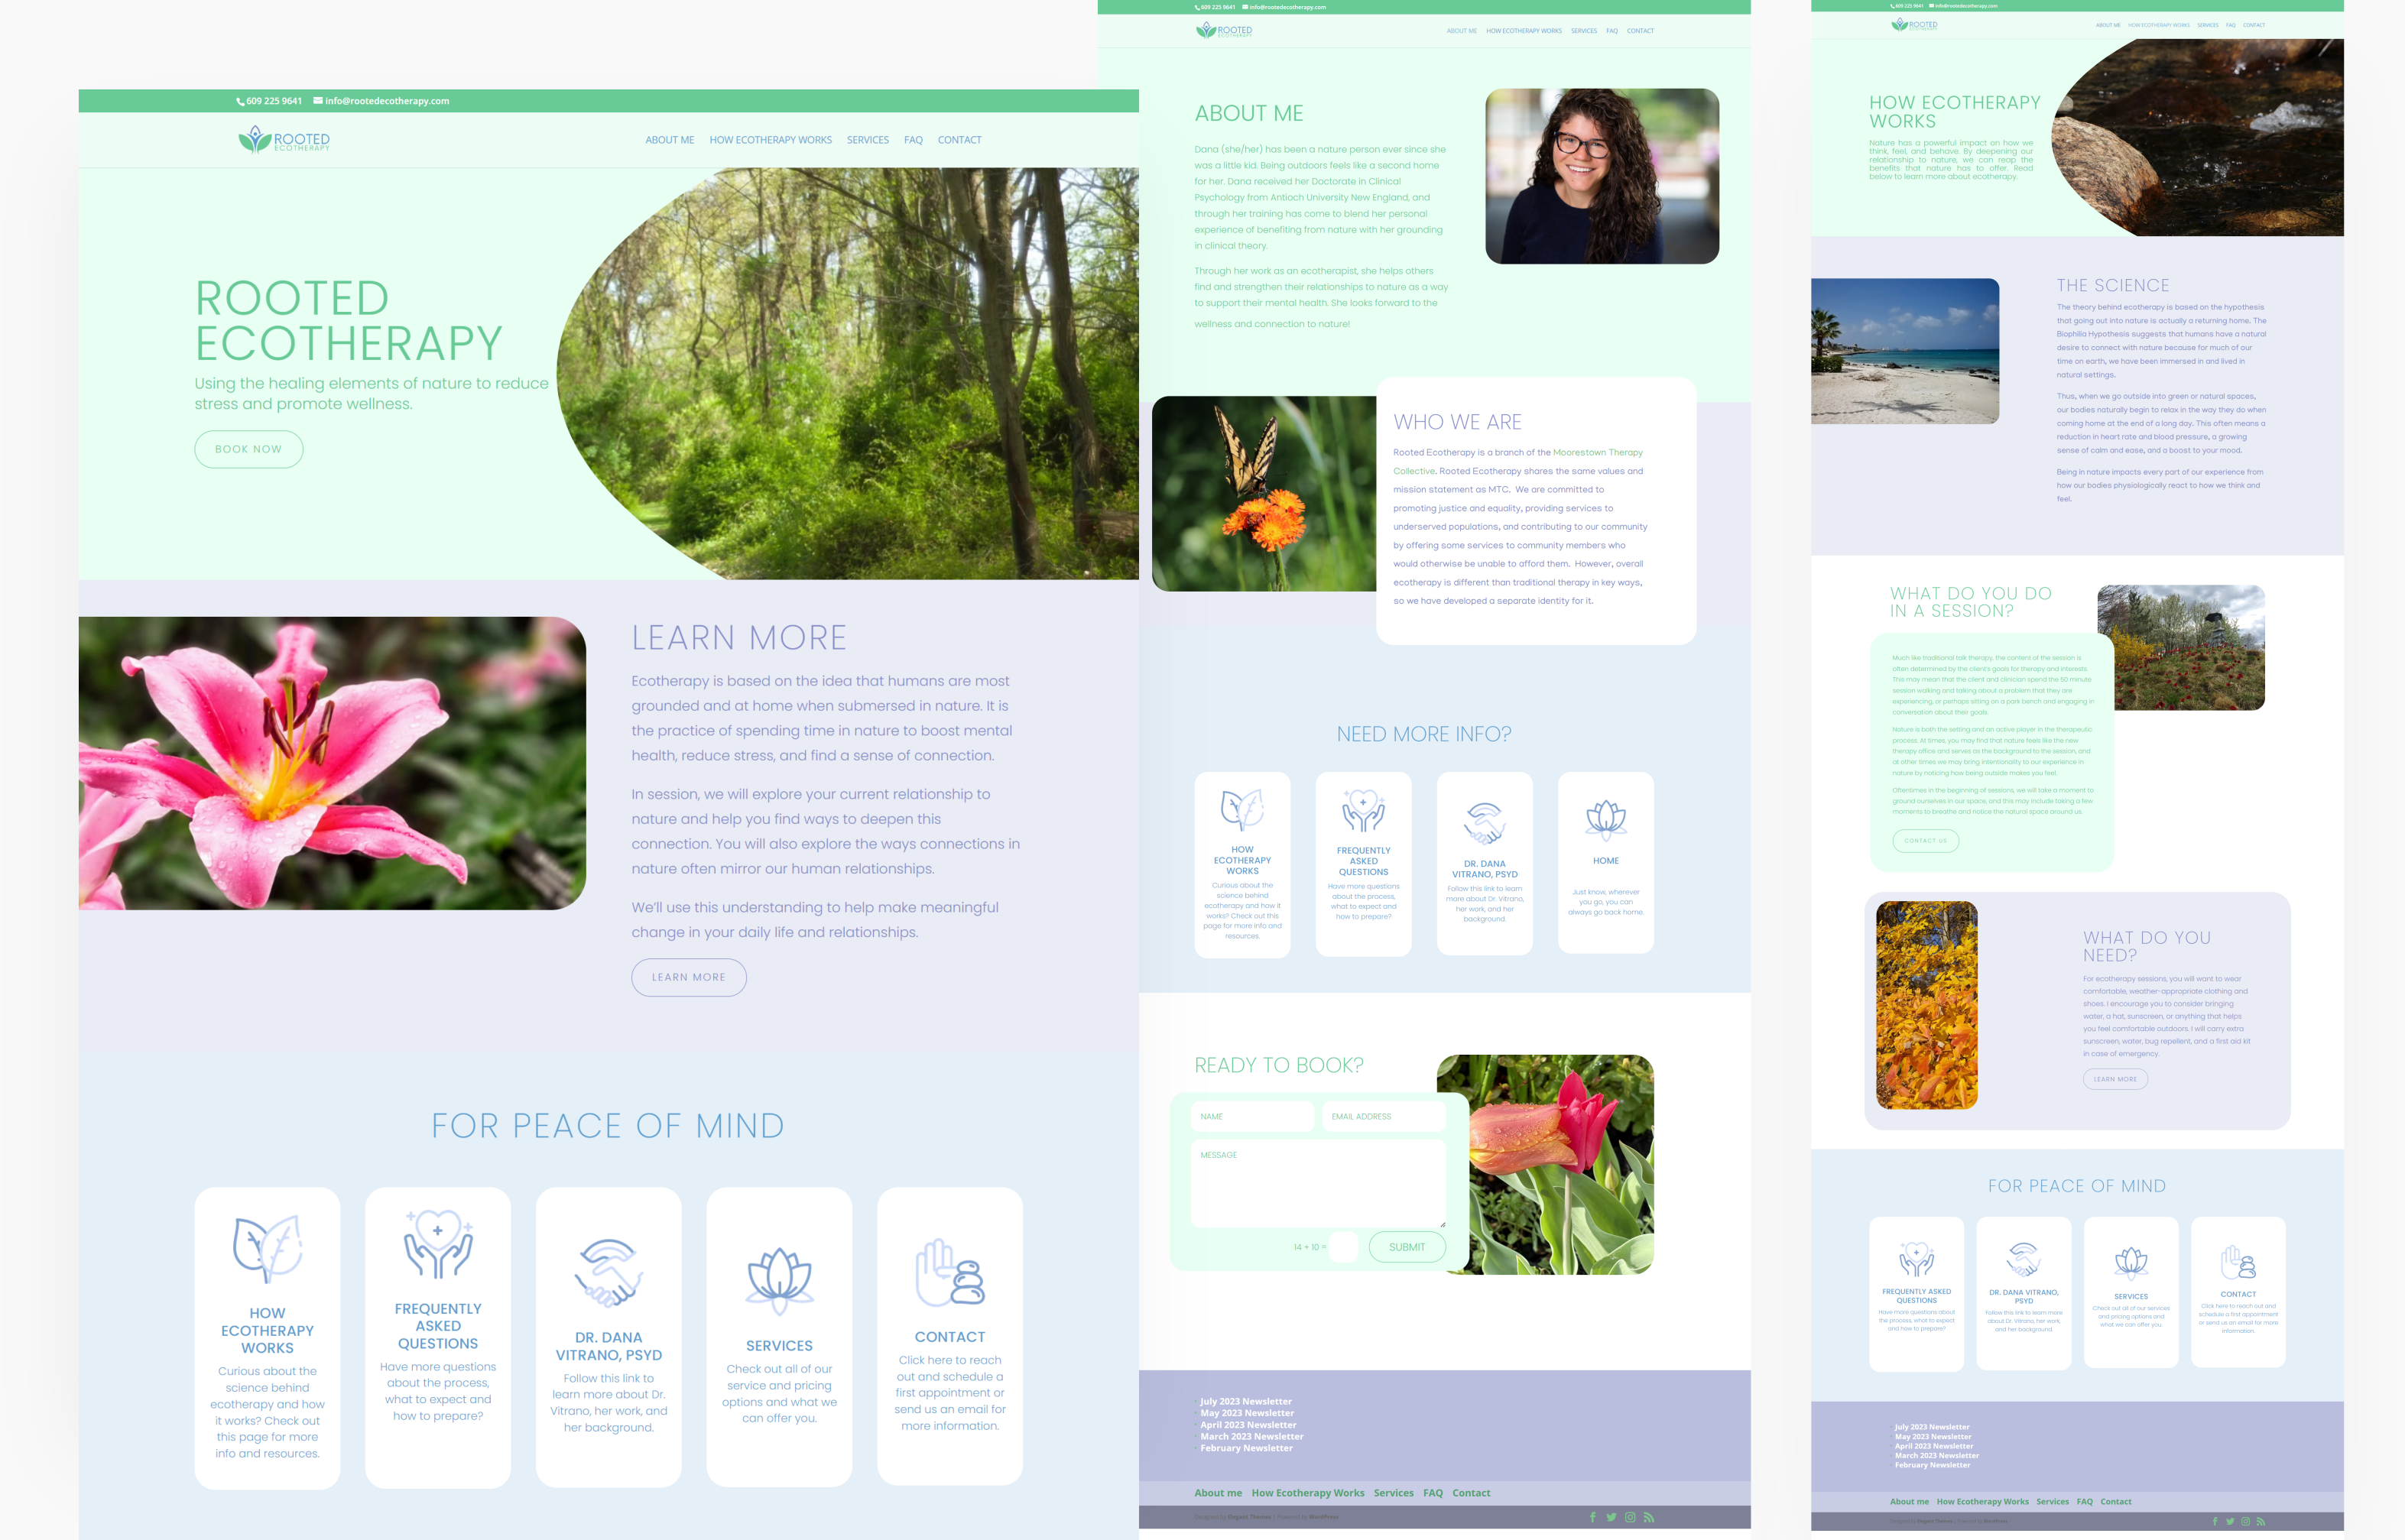 Web design for Rooted Ecotherapy. Designed by Johnery